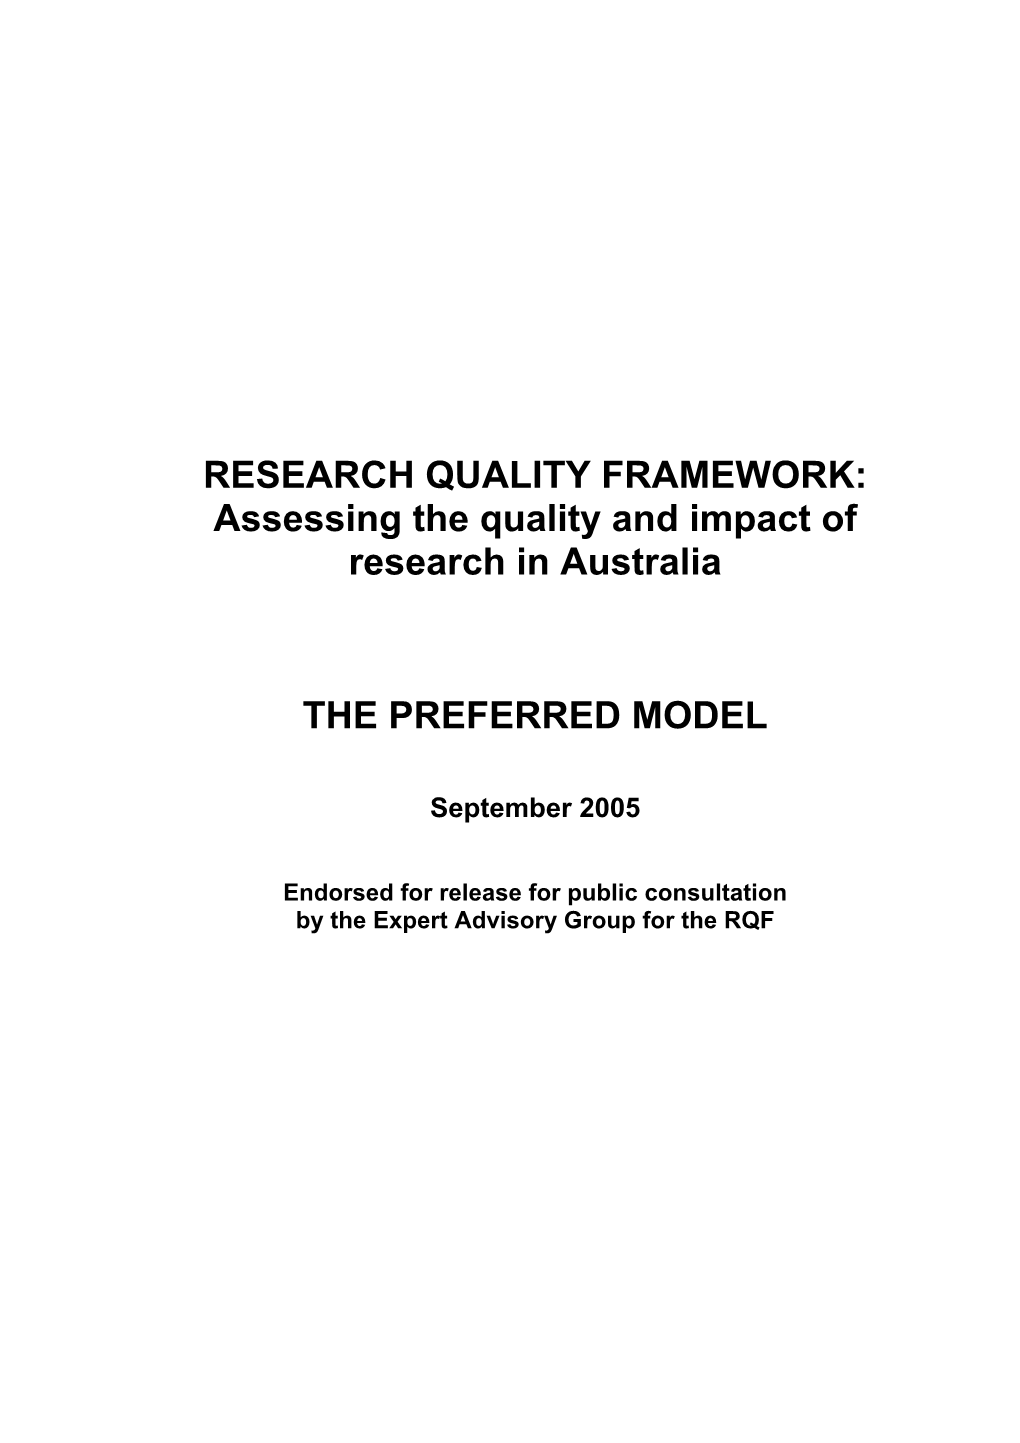 Assessing the Quality and Impact of Research in Australia the PREFERRED MODEL